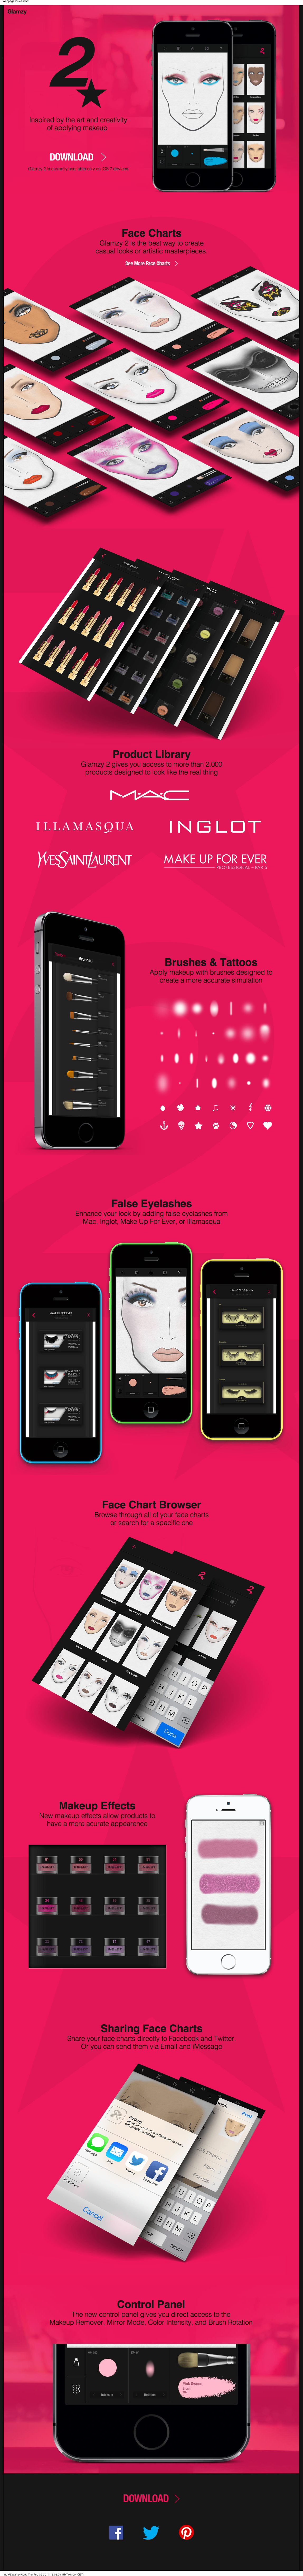 mobile makeup ios app cosmetics Make Up looks Facecharts Face Charts